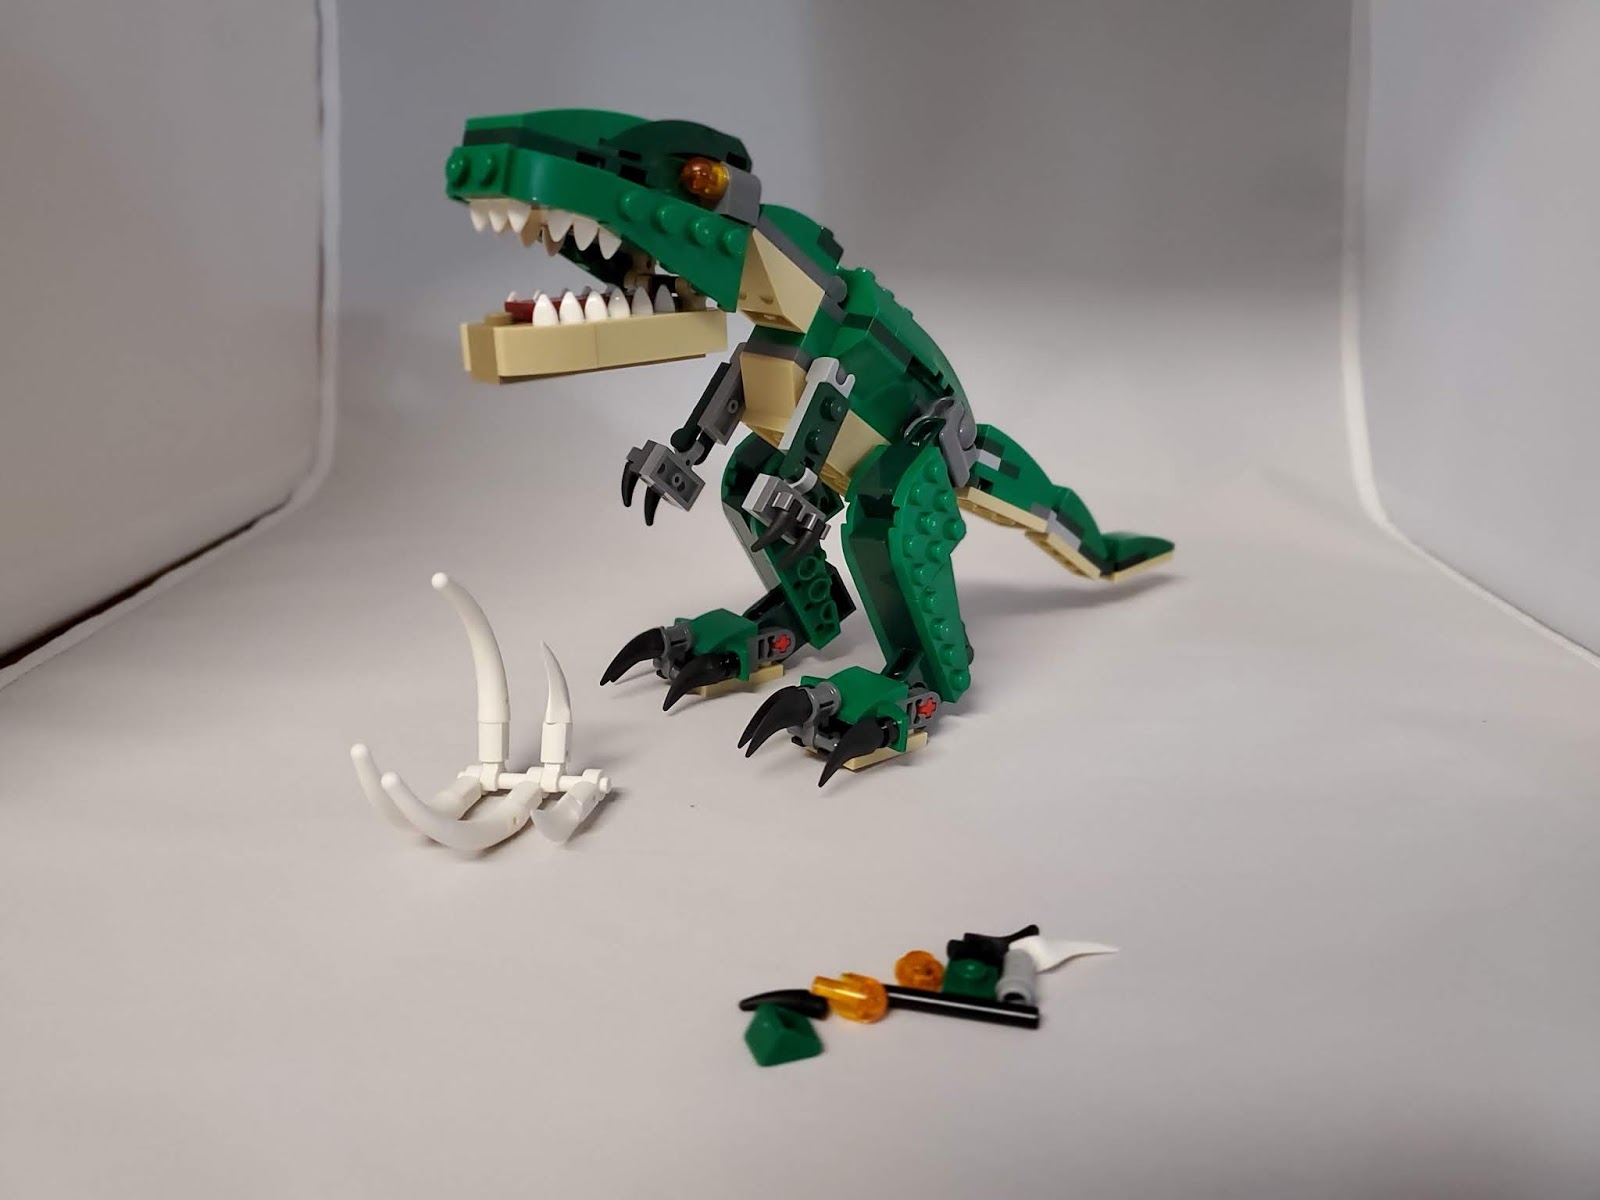 31058 Mighty Dinosaurs – Review